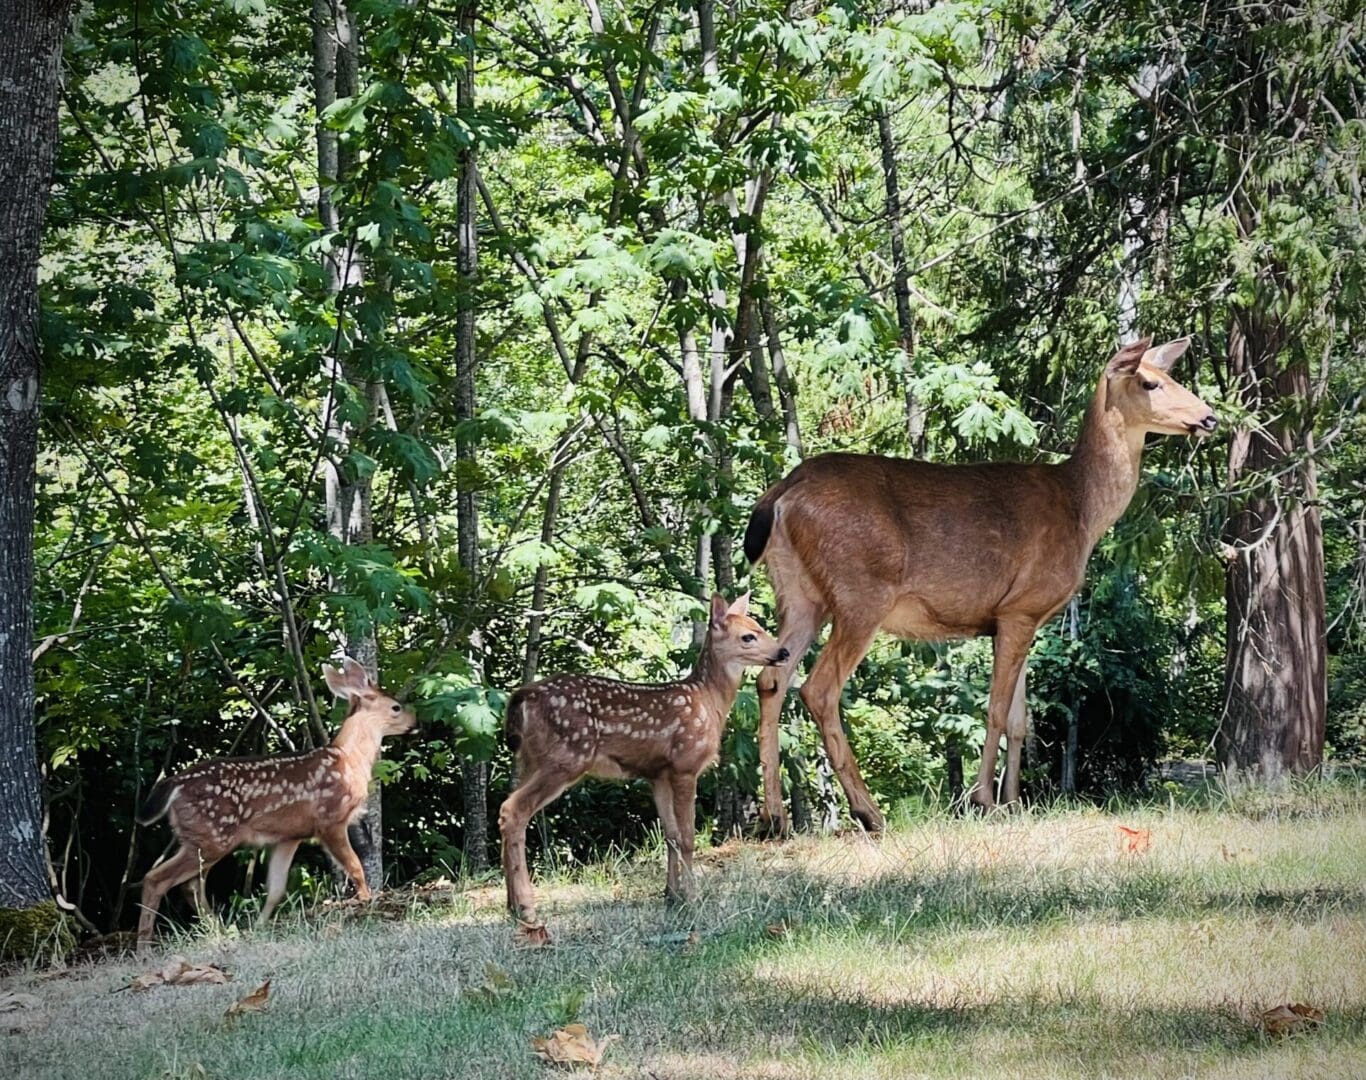 A group of deer standing in the grass near trees.